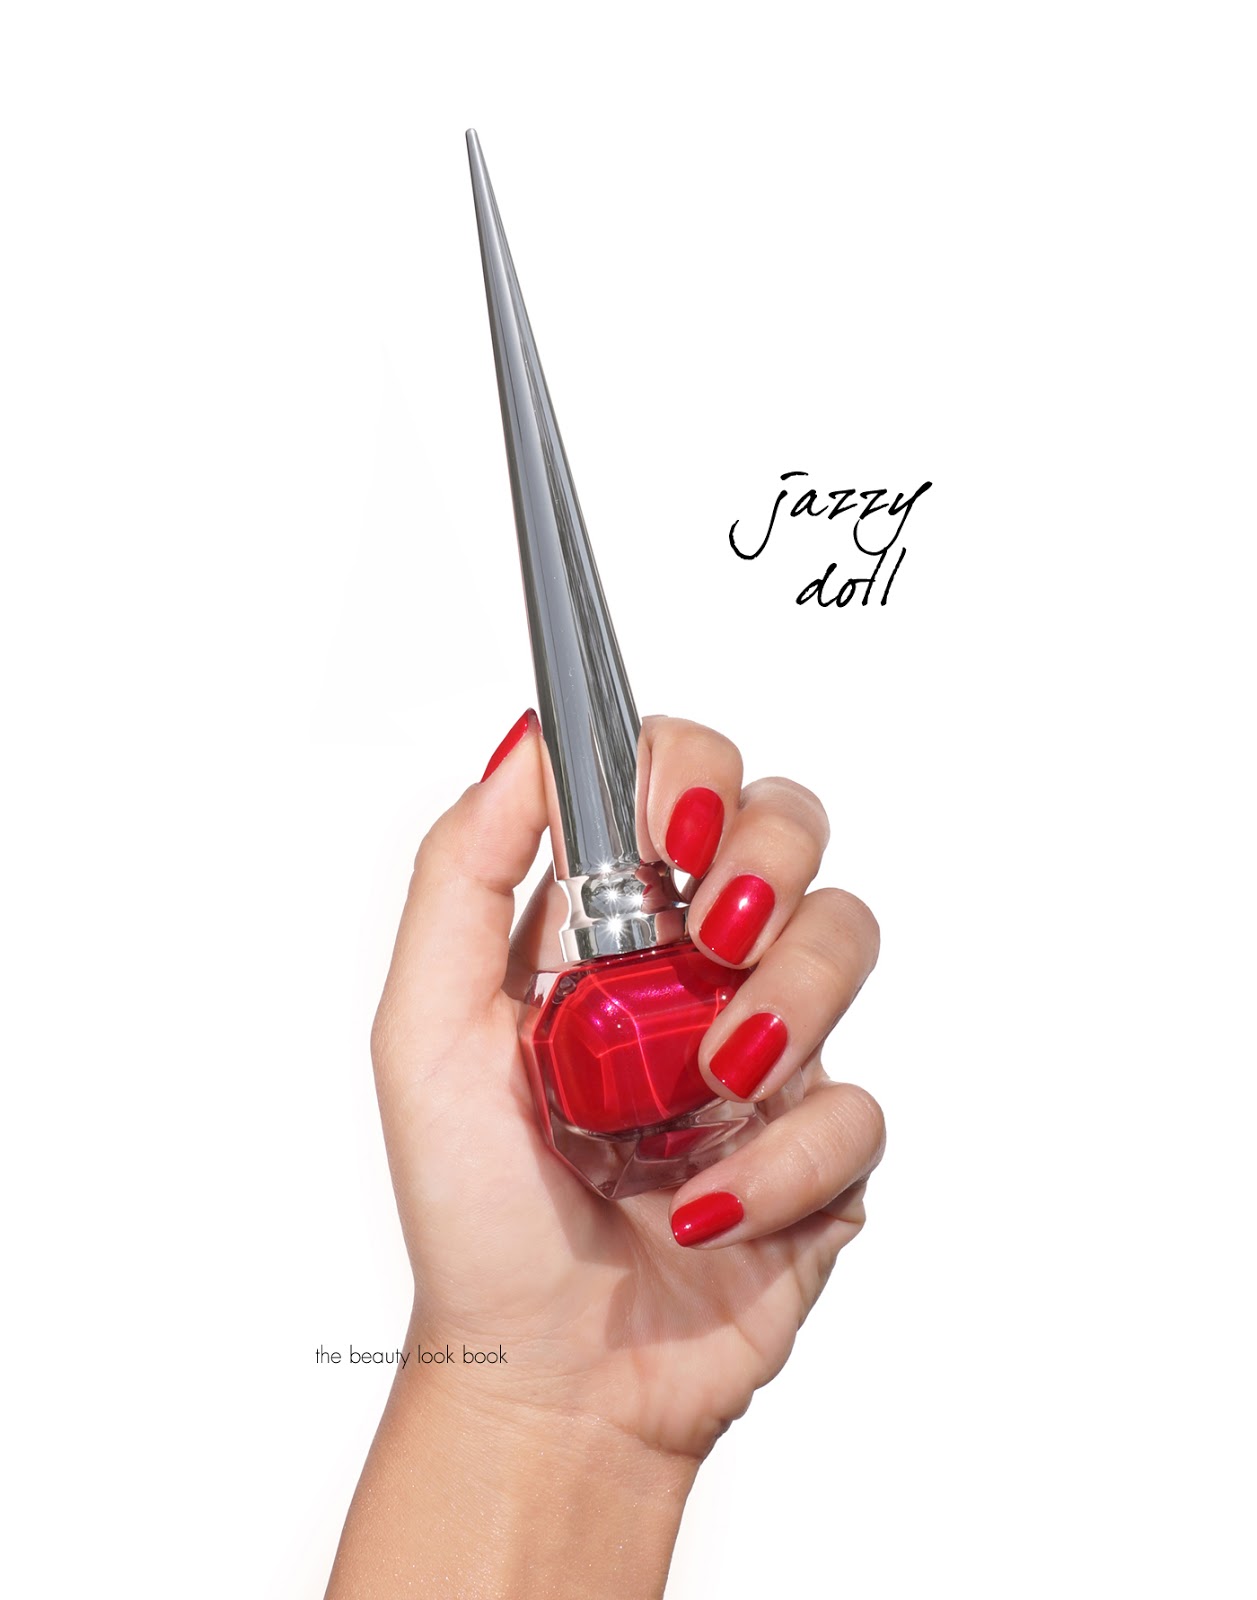 kommentator PEF Hals Christian Louboutin Red Nail Extensions - The Beauty Look Book